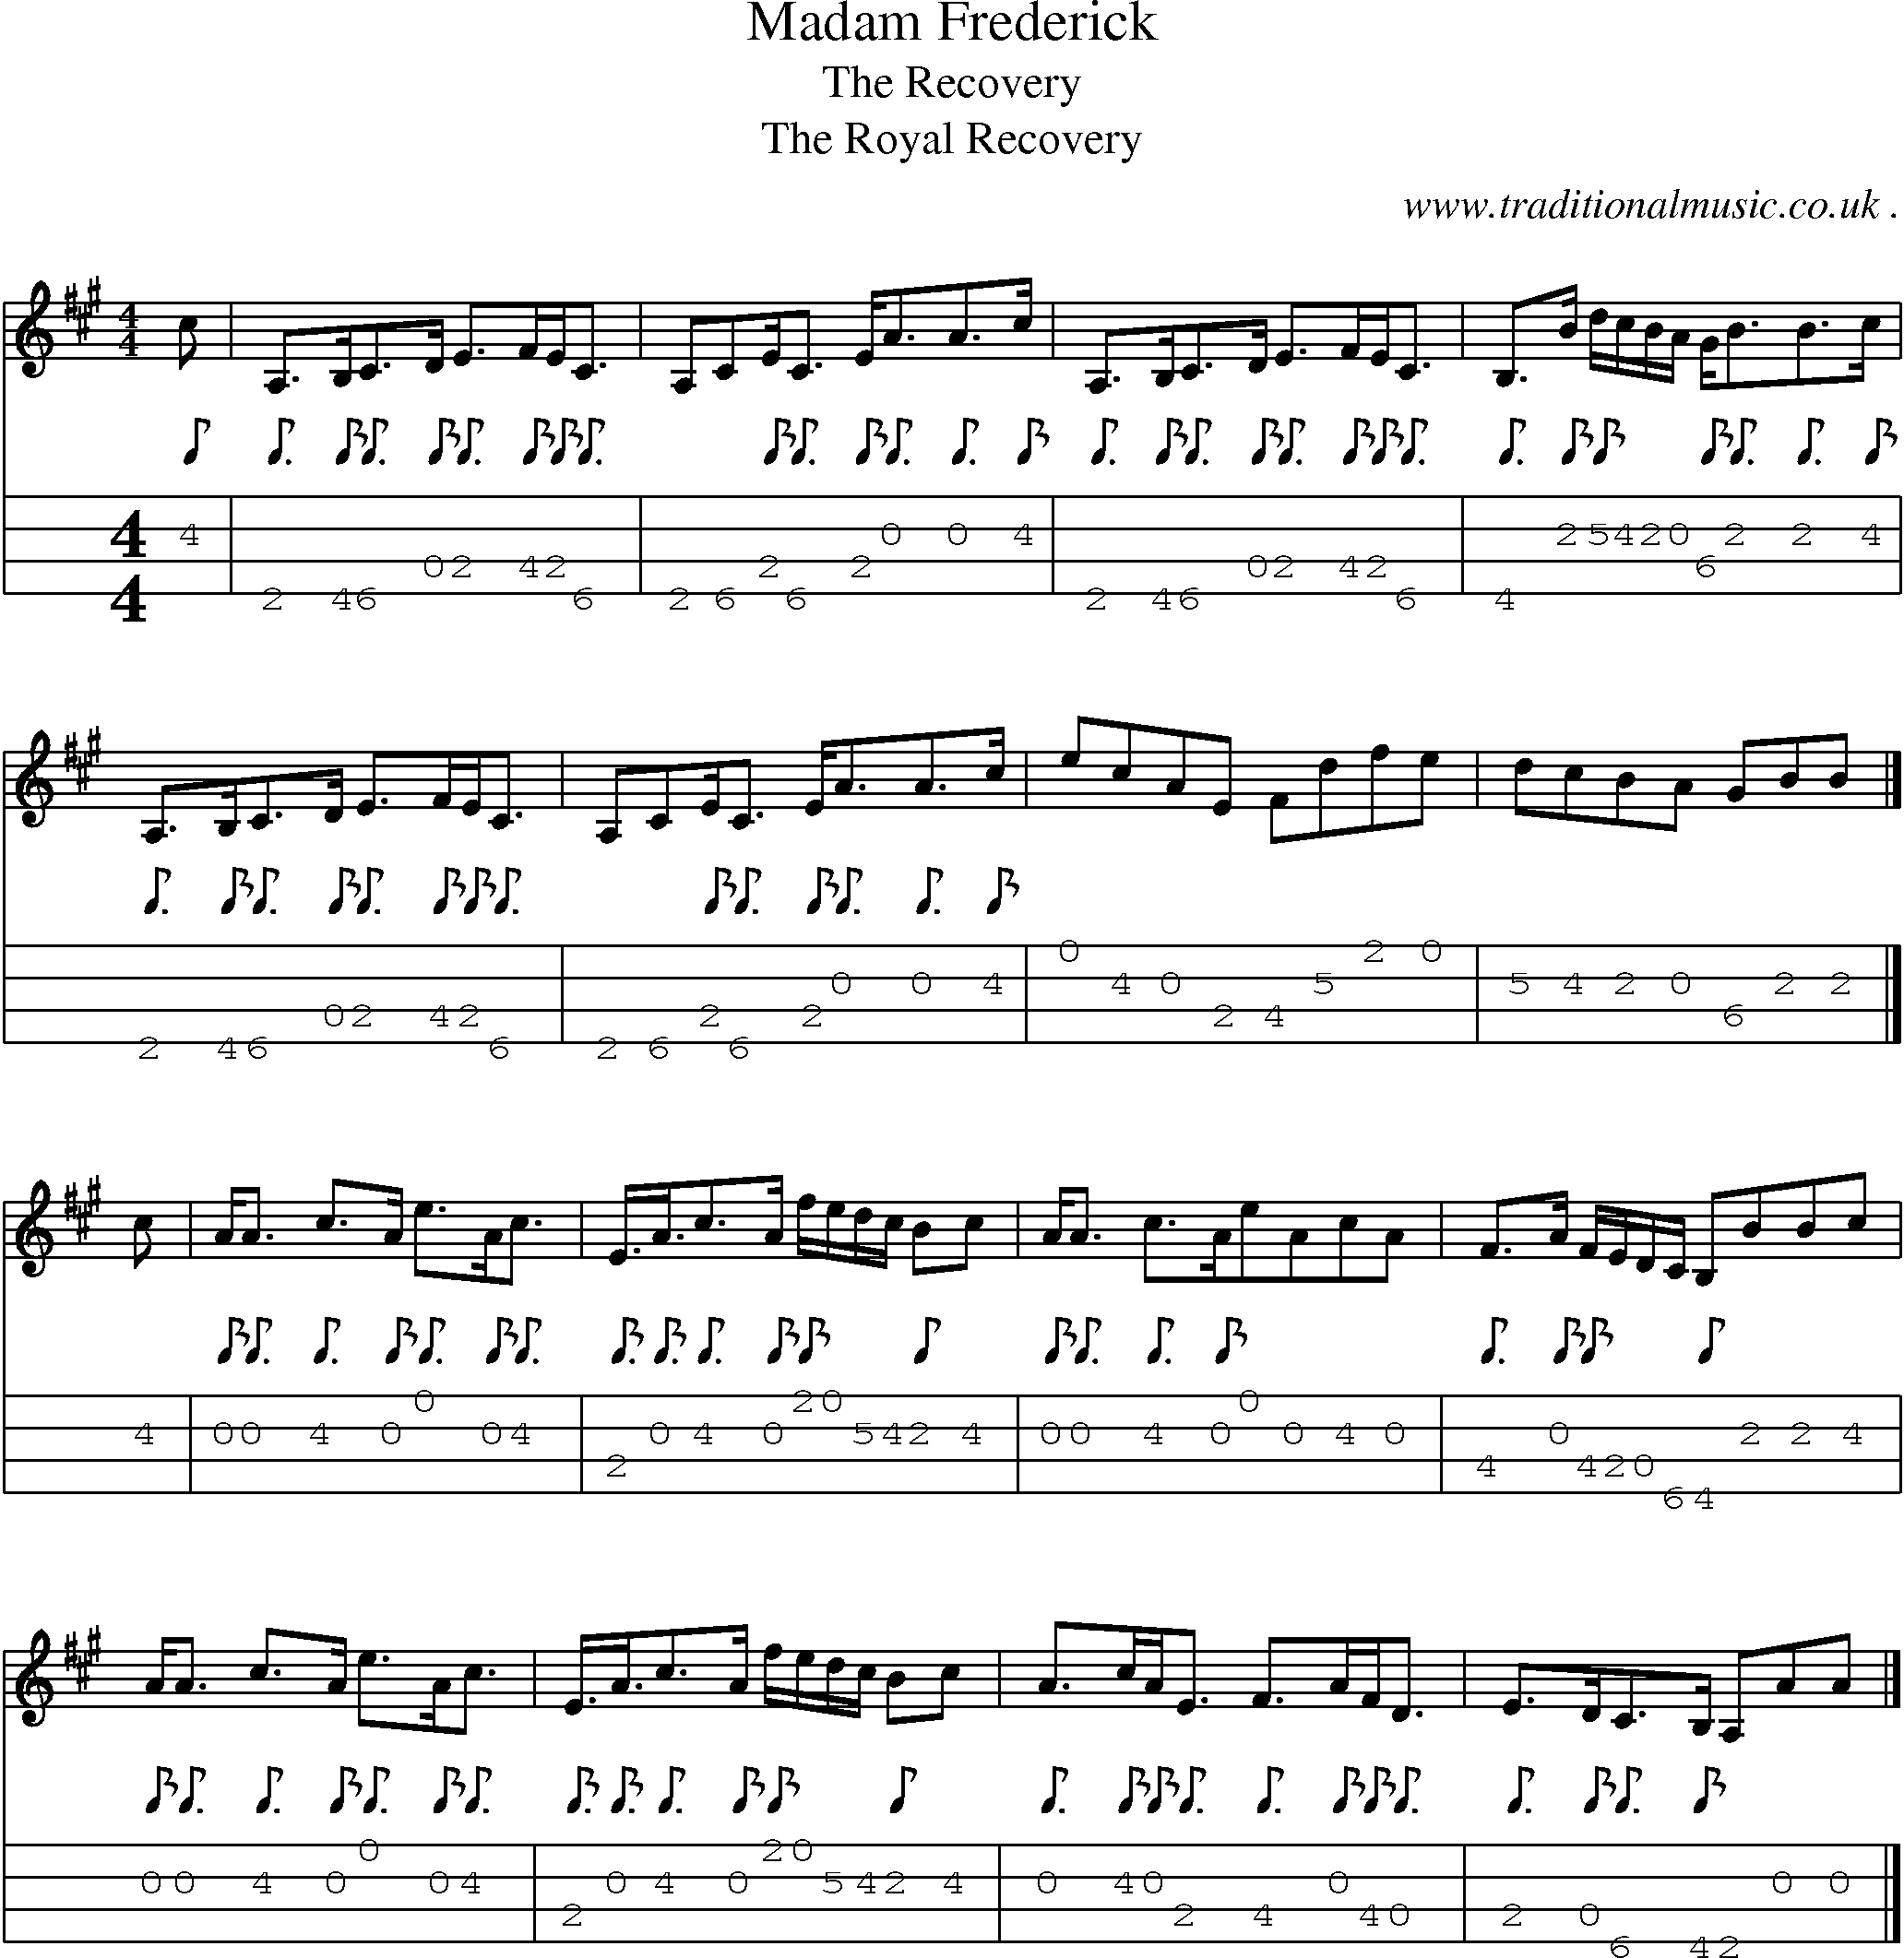 Sheet-music  score, Chords and Mandolin Tabs for Madam Frederick